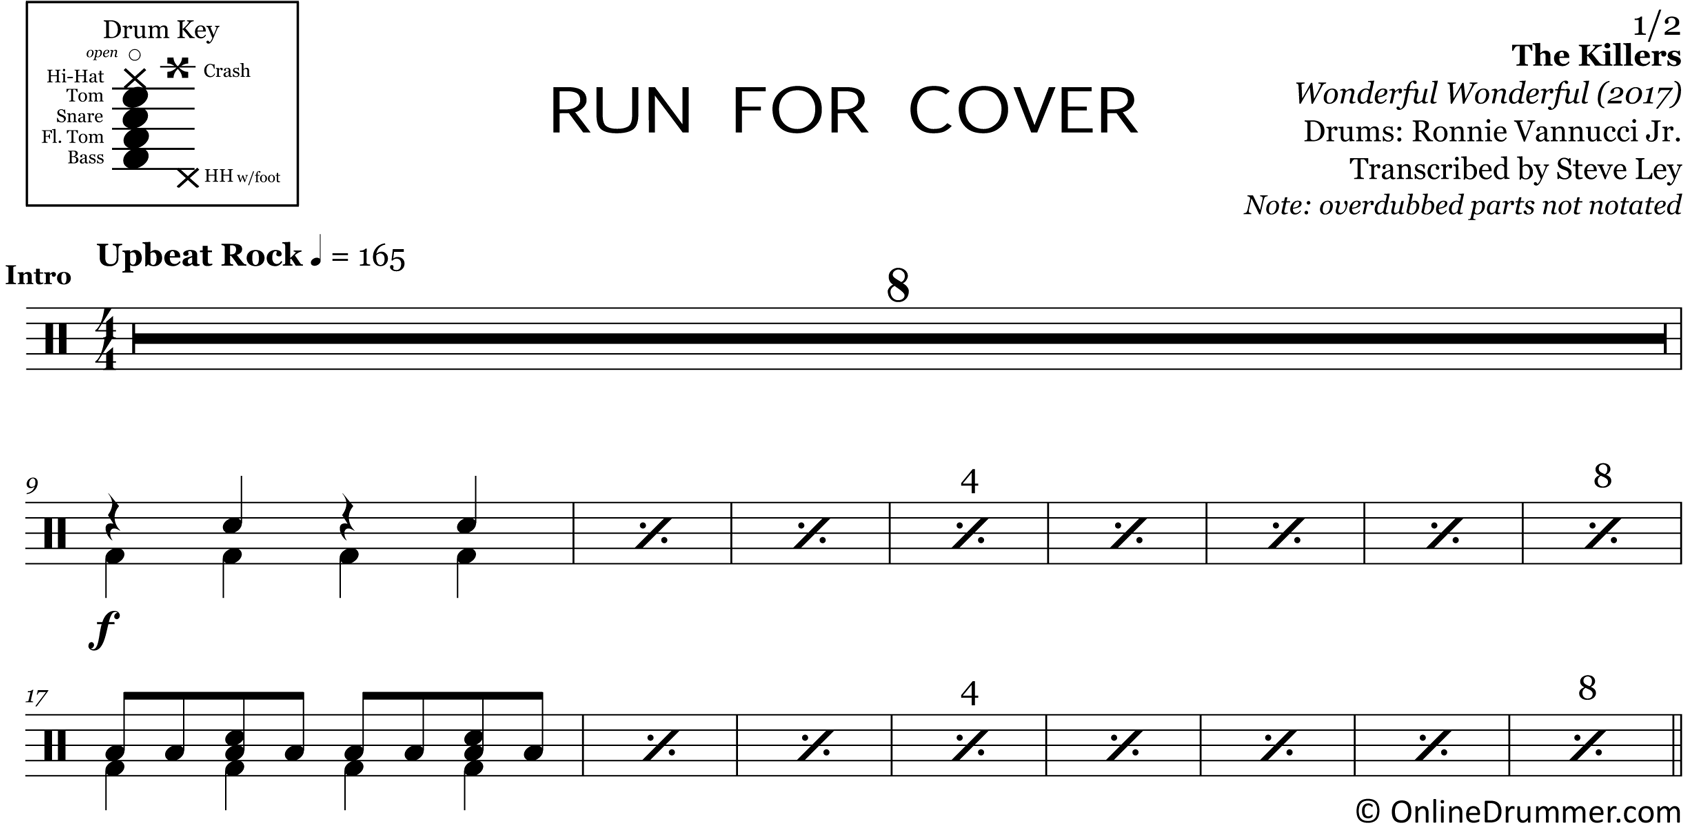 Run For Cover - The Killers - Drum Sheet Music